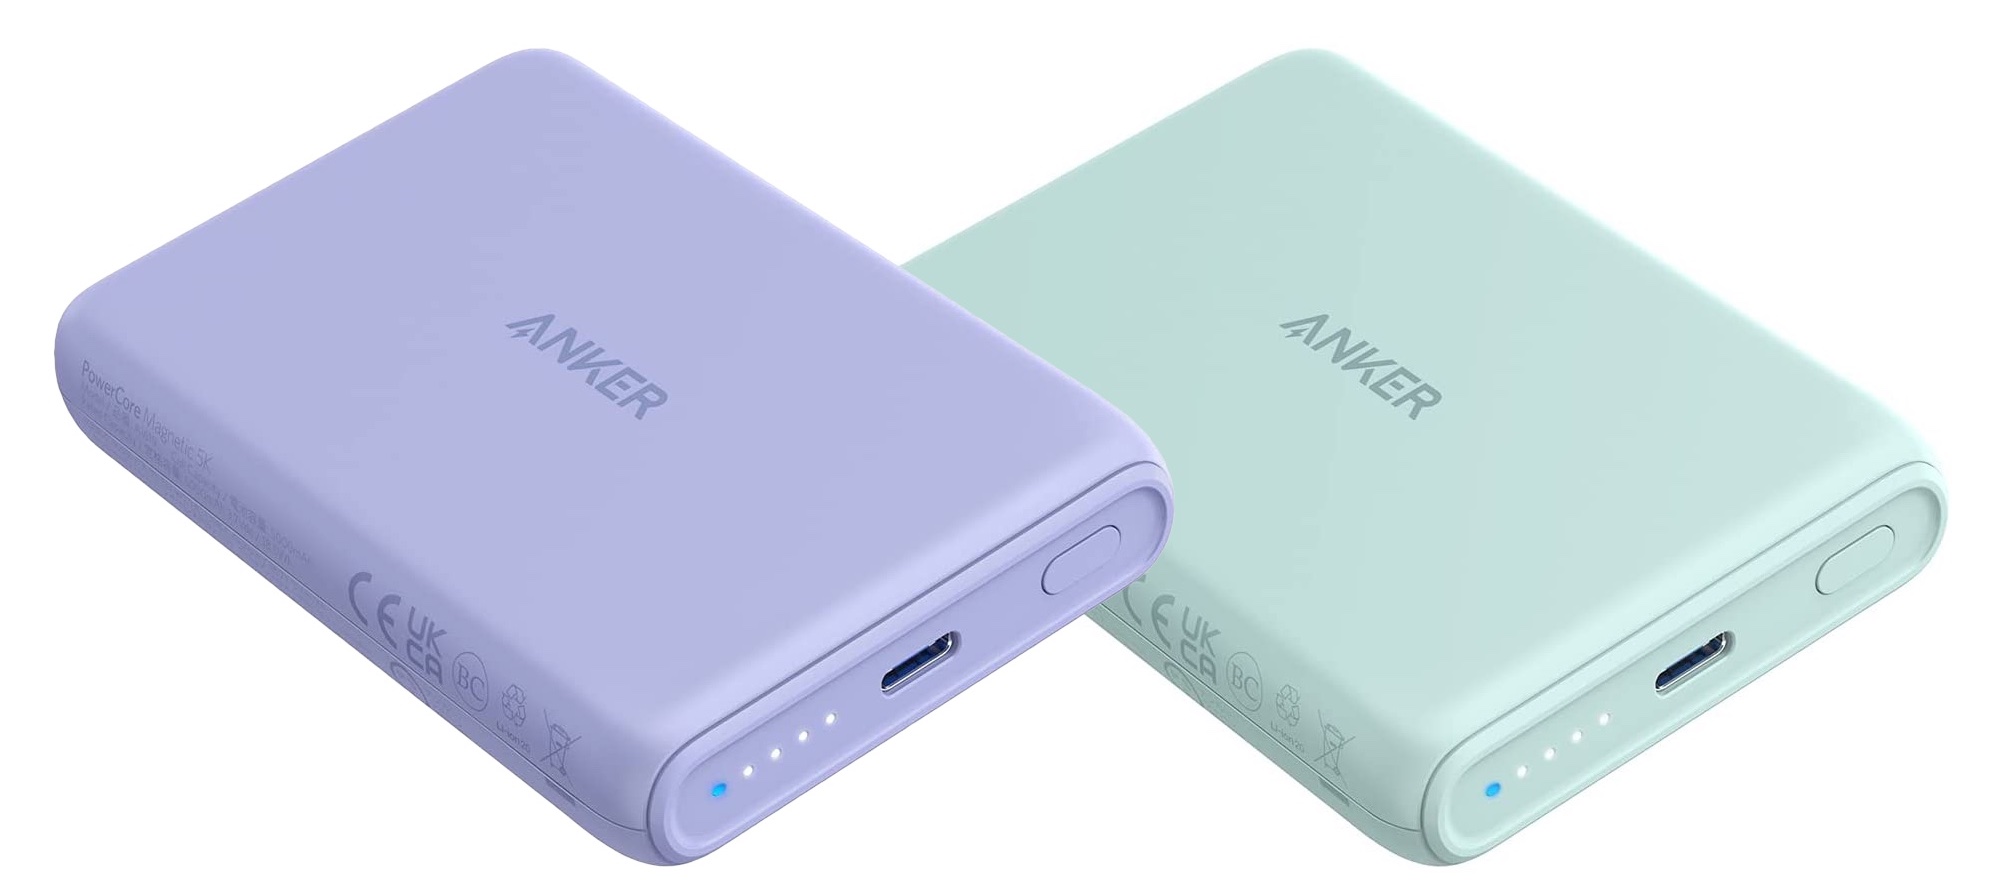 Magnetic wireless power bank magsafe. Power Bank MAGSAFE iphone. Anker Wireless Power Bank. Wireless MAGSAFE Power Bank. Apple MAGSAFE Charger Power Bank.